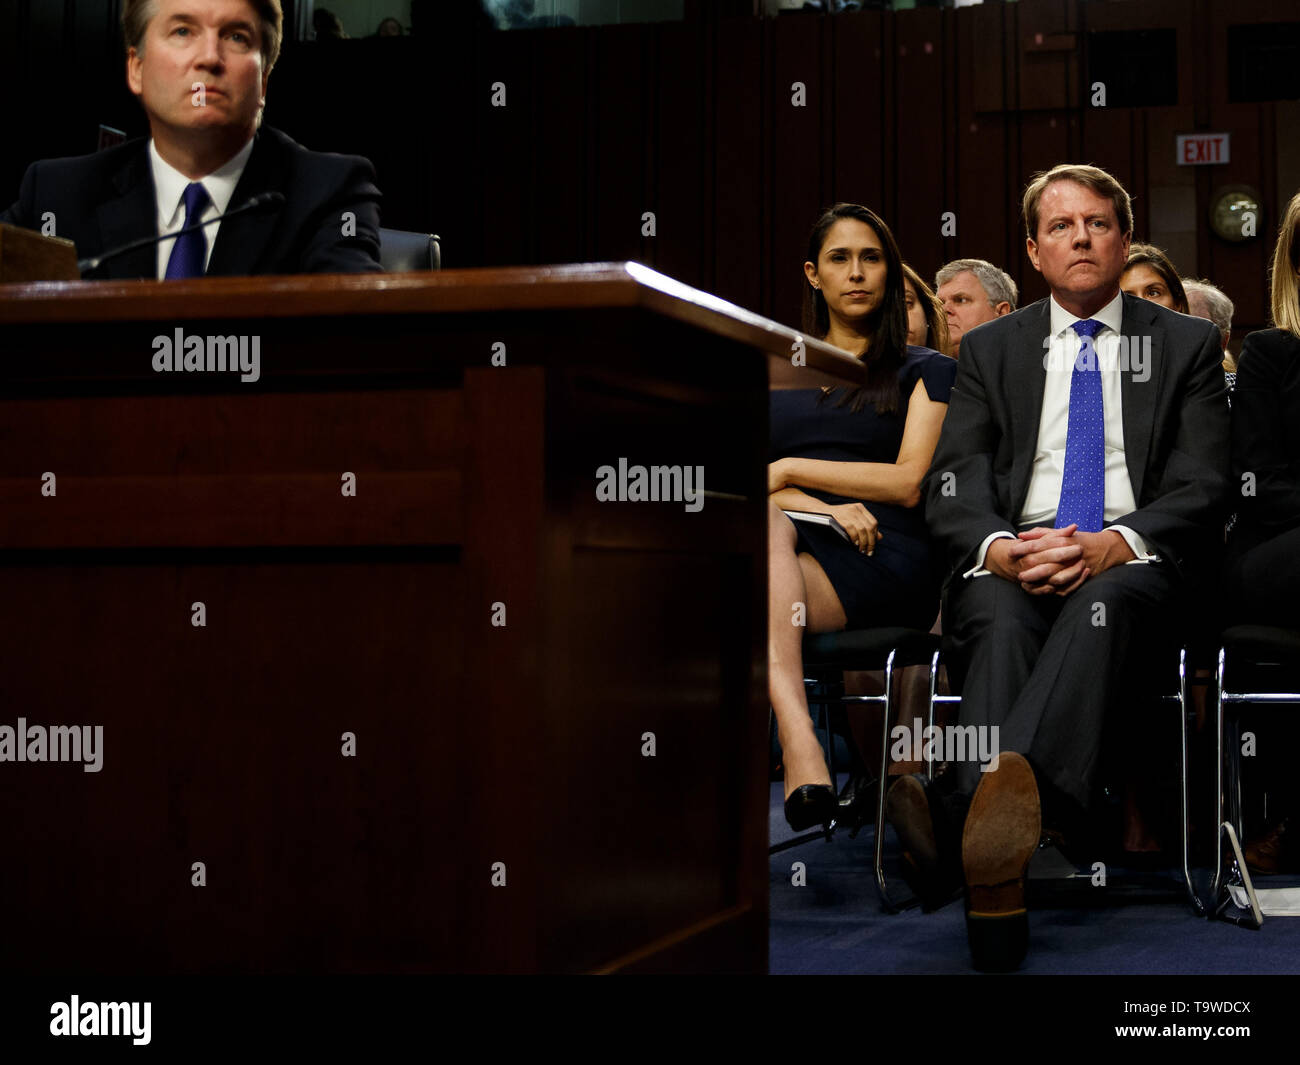 Washington, DC, USA. 4th Sep, 2018. Then White House counsel Don McGahn (R) reacts in the audience during the confirmation hearing for Supreme Court Justice nominee Brett Kavanaugh before the U.S. Senate Judiciary Committee on Capitol Hill in Washington, DC, the United States, on Sept. 4, 2018. The White House on Monday instructed former counsel Don McGahn to defy a congressional subpoena and skip a hearing scheduled for Tuesday relating to the Russia probe. Credit: Ting Shen/Xinhua/Alamy Live News Stock Photo